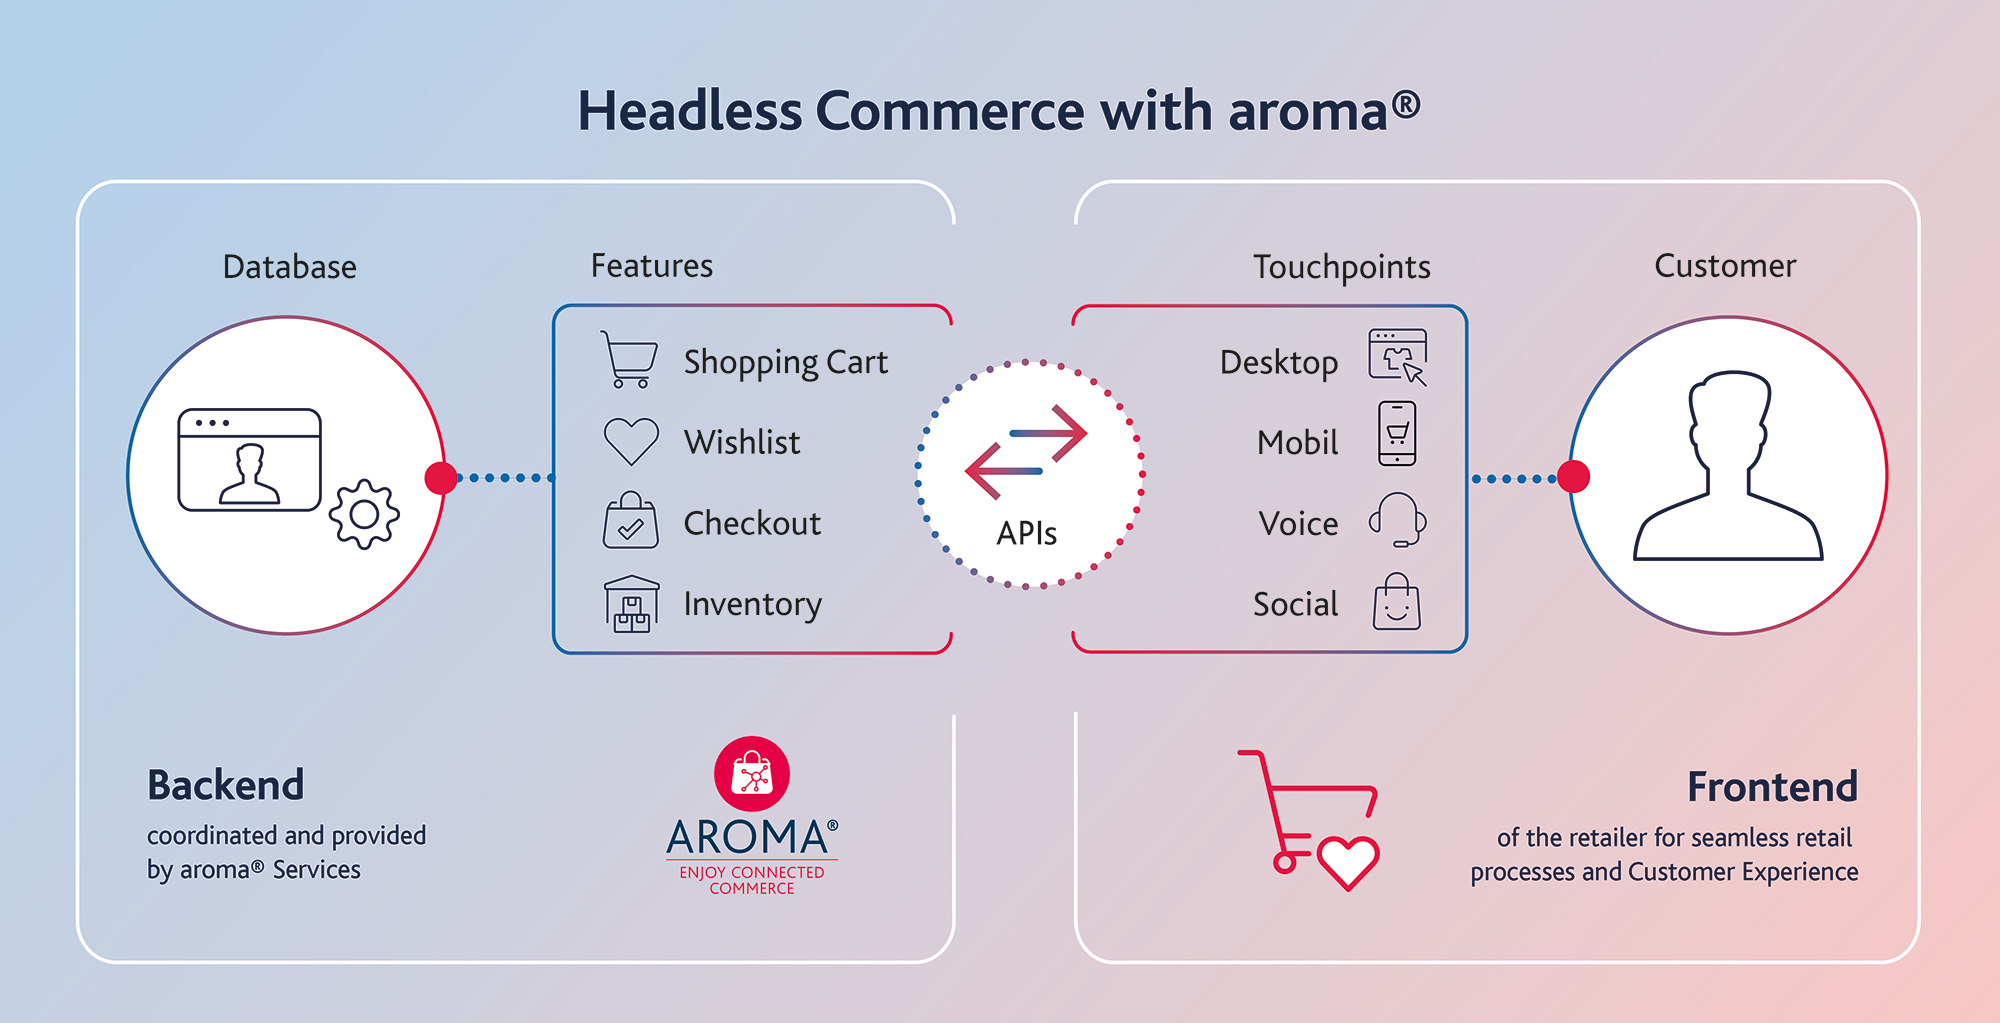 Headless Commerce with aroma® - Diagram